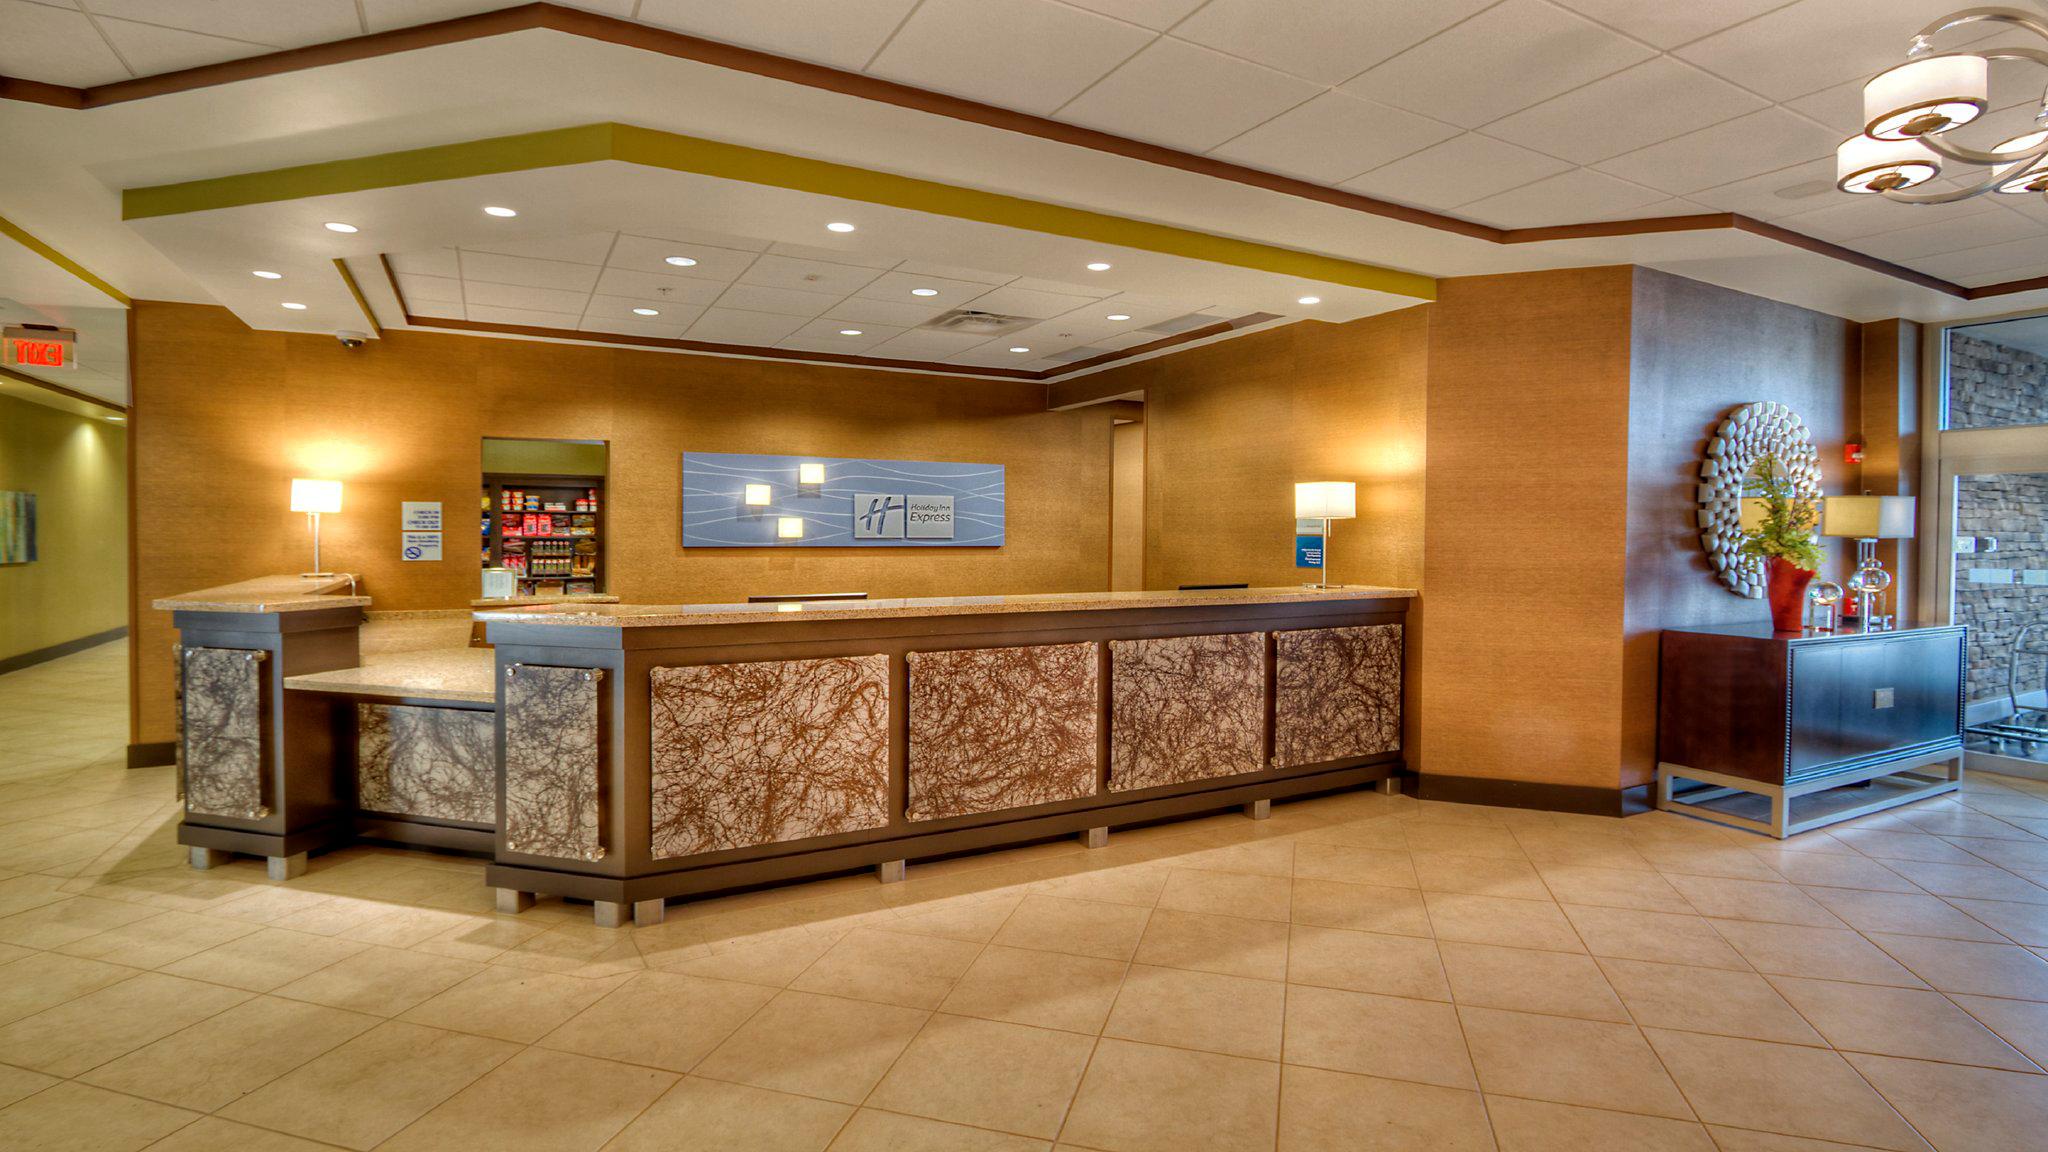 Holiday Inn Express & Suites Pittsburgh SW - Southpointe Photo